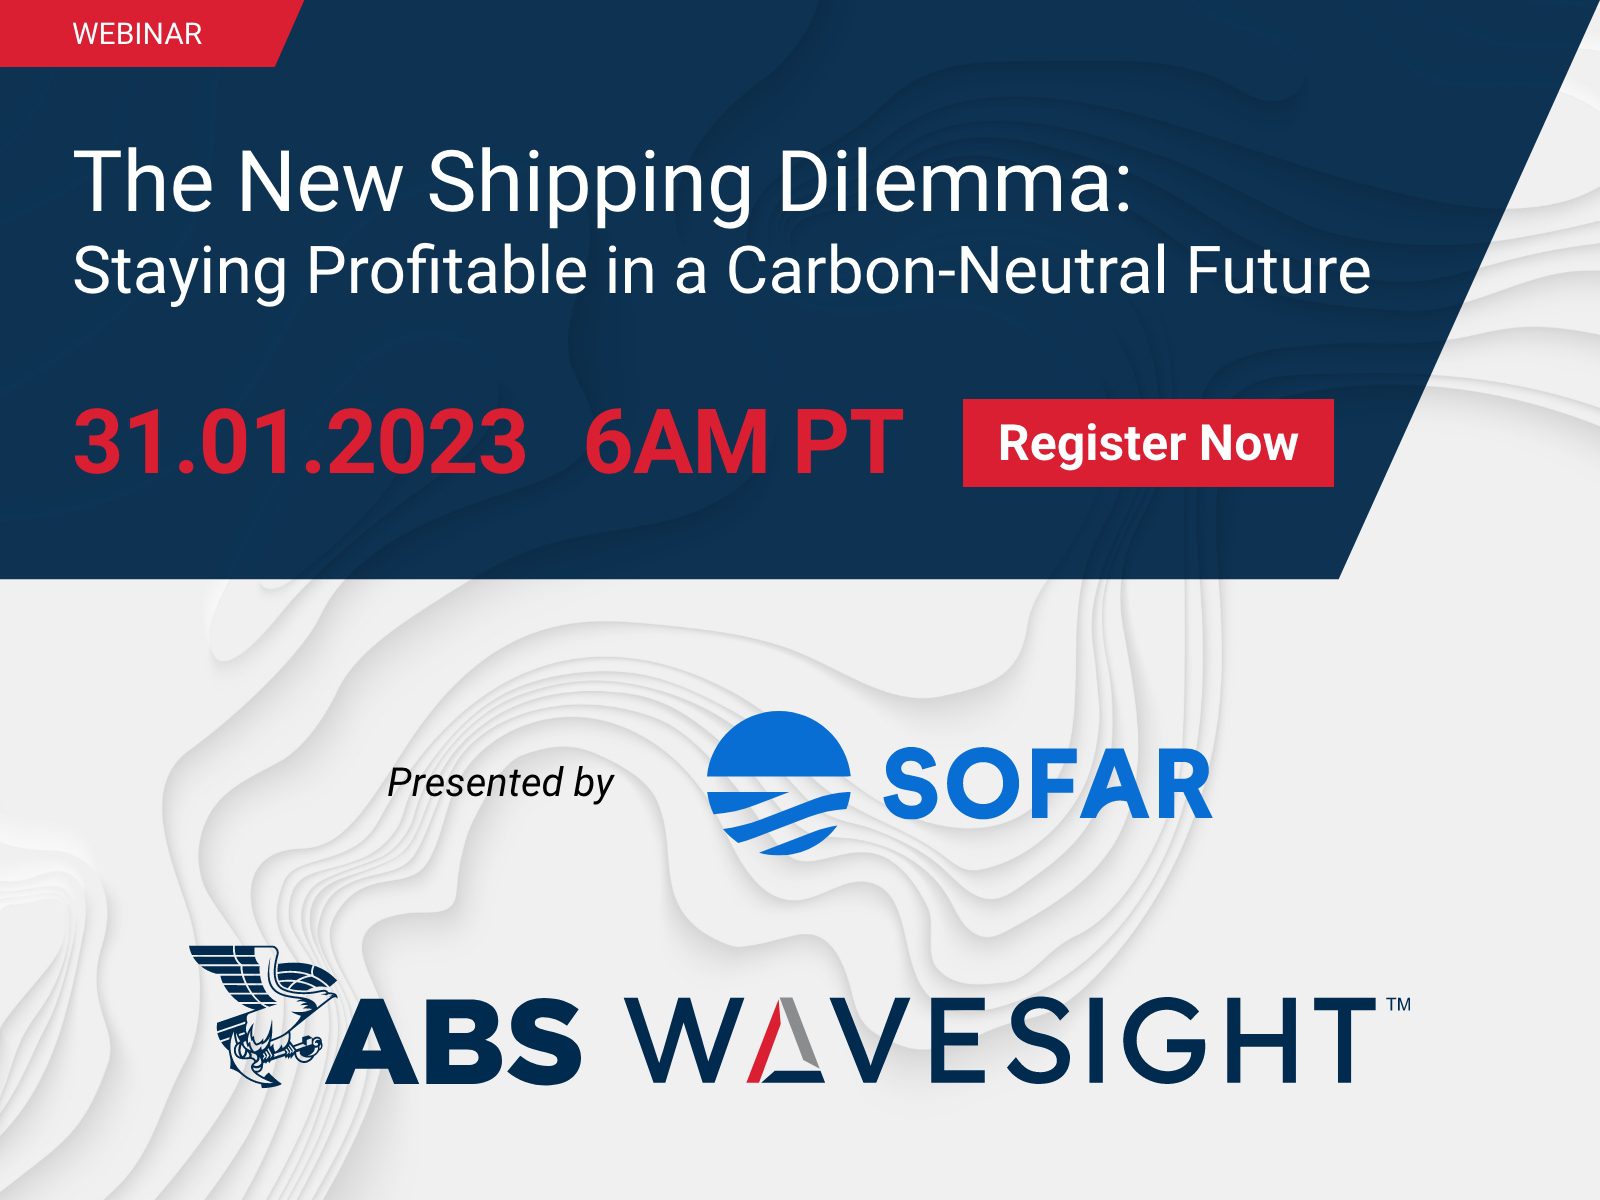 The New Shipping Dilemma – Staying Profitable in a Carbon-Neutral Future